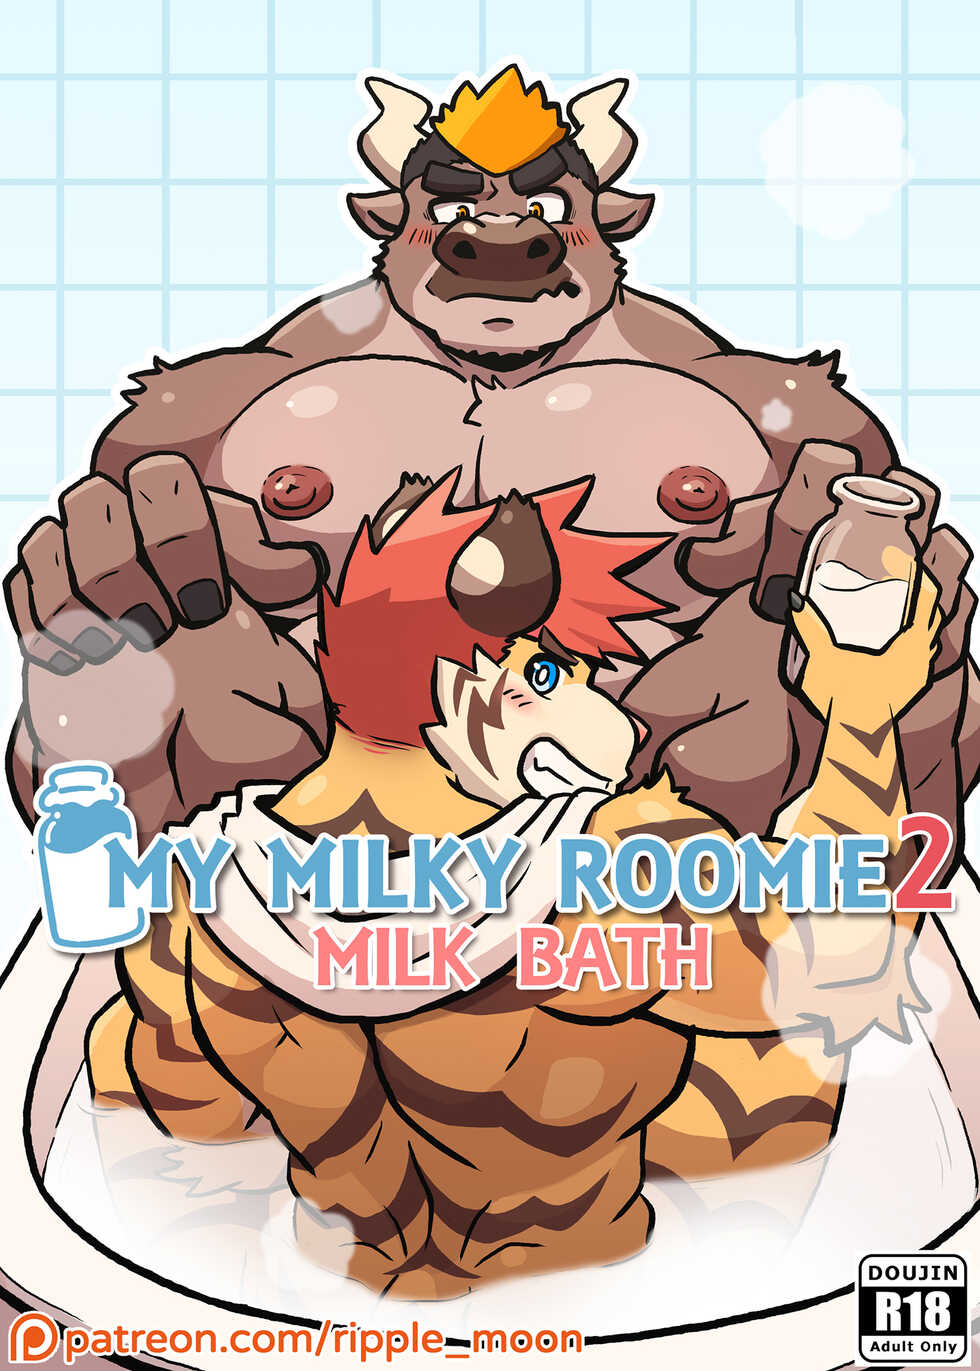 [Ripple Moon] My Milky Roomie 2: Milk Bath (Ongoing) [English] (Flat Color) - Page 1